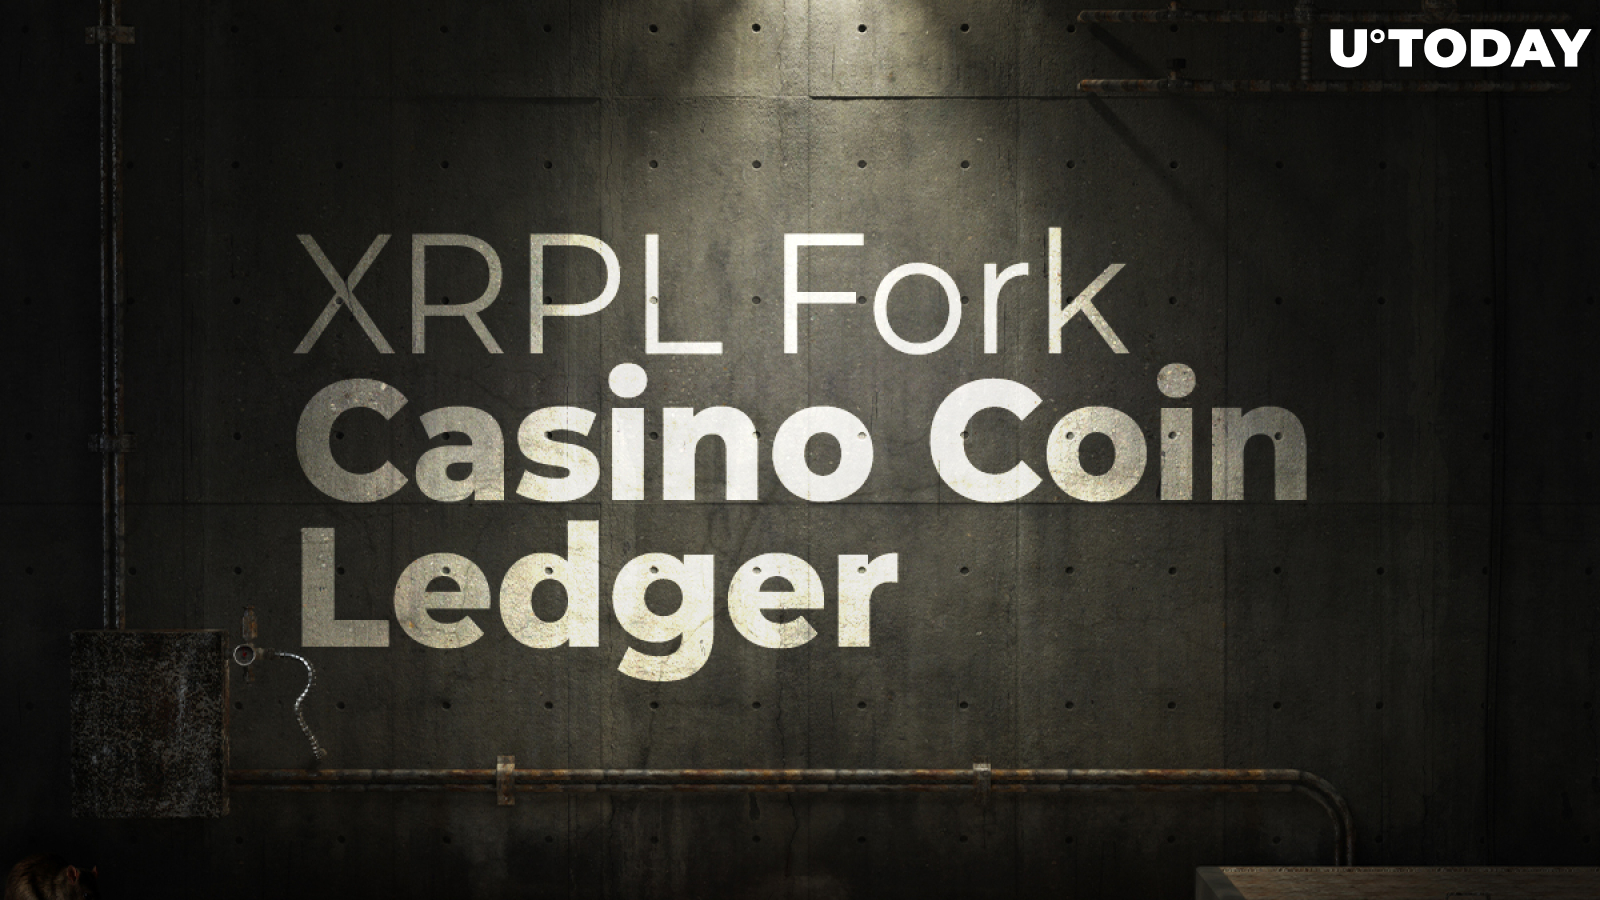 XRPL Fork CasinoCoin Ledger Abandoned by Its Flagship Project. Here's Why